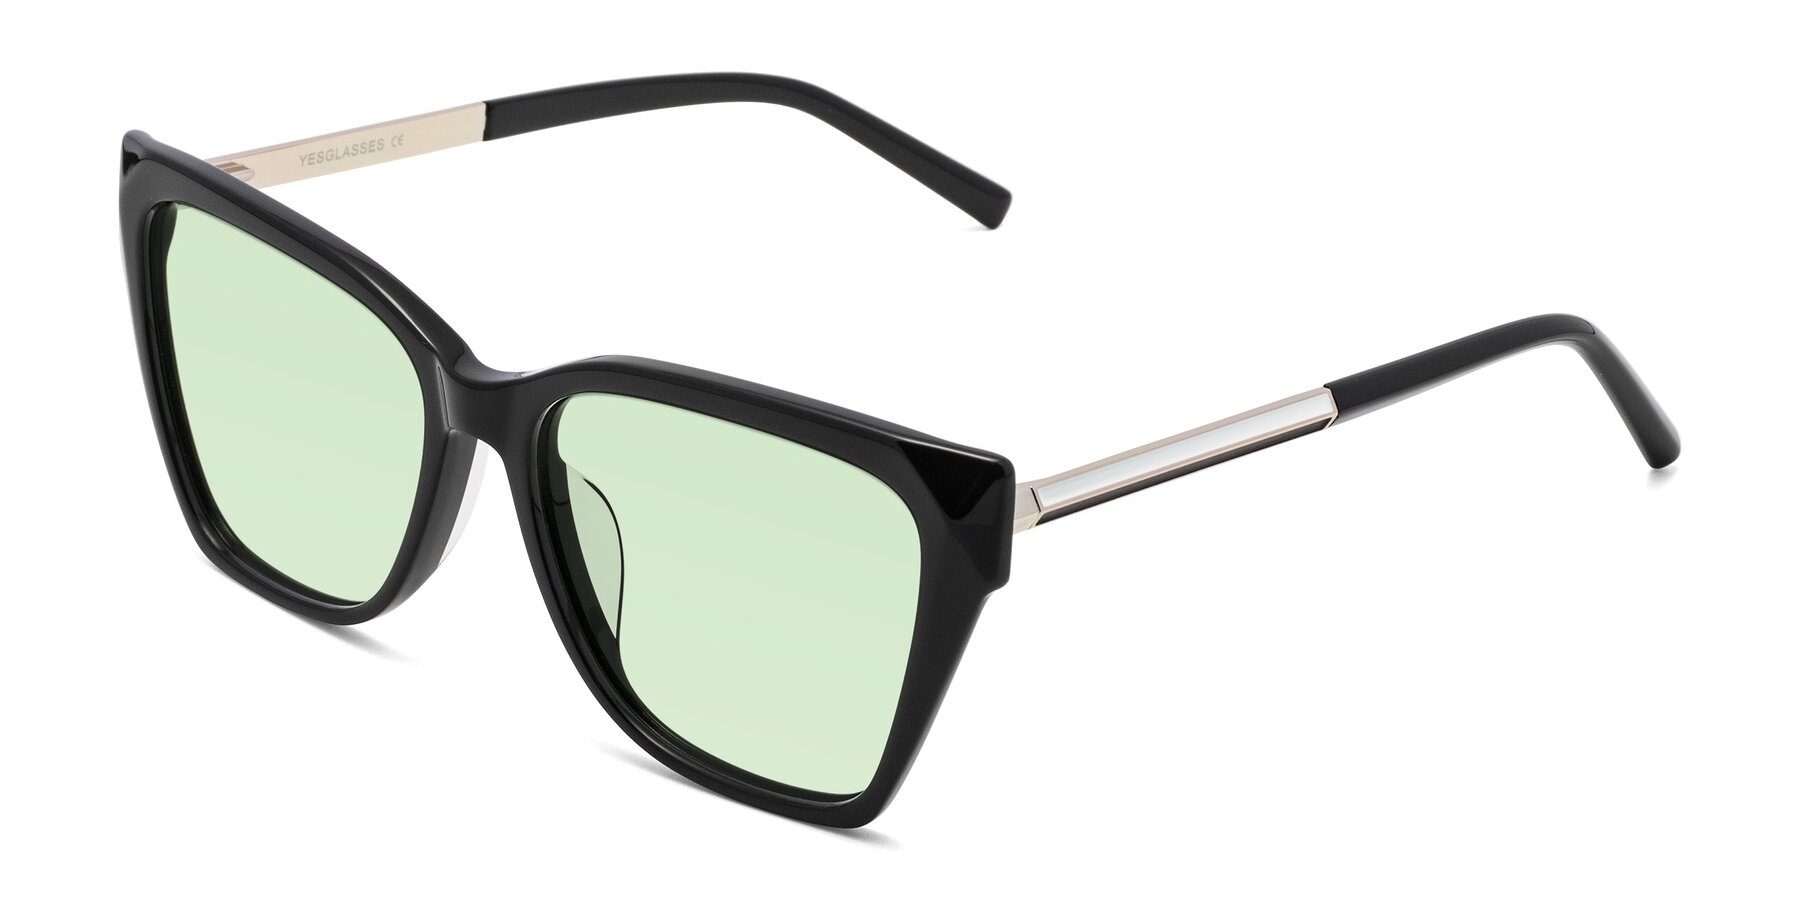 Angle of Swartz in Black with Light Green Tinted Lenses